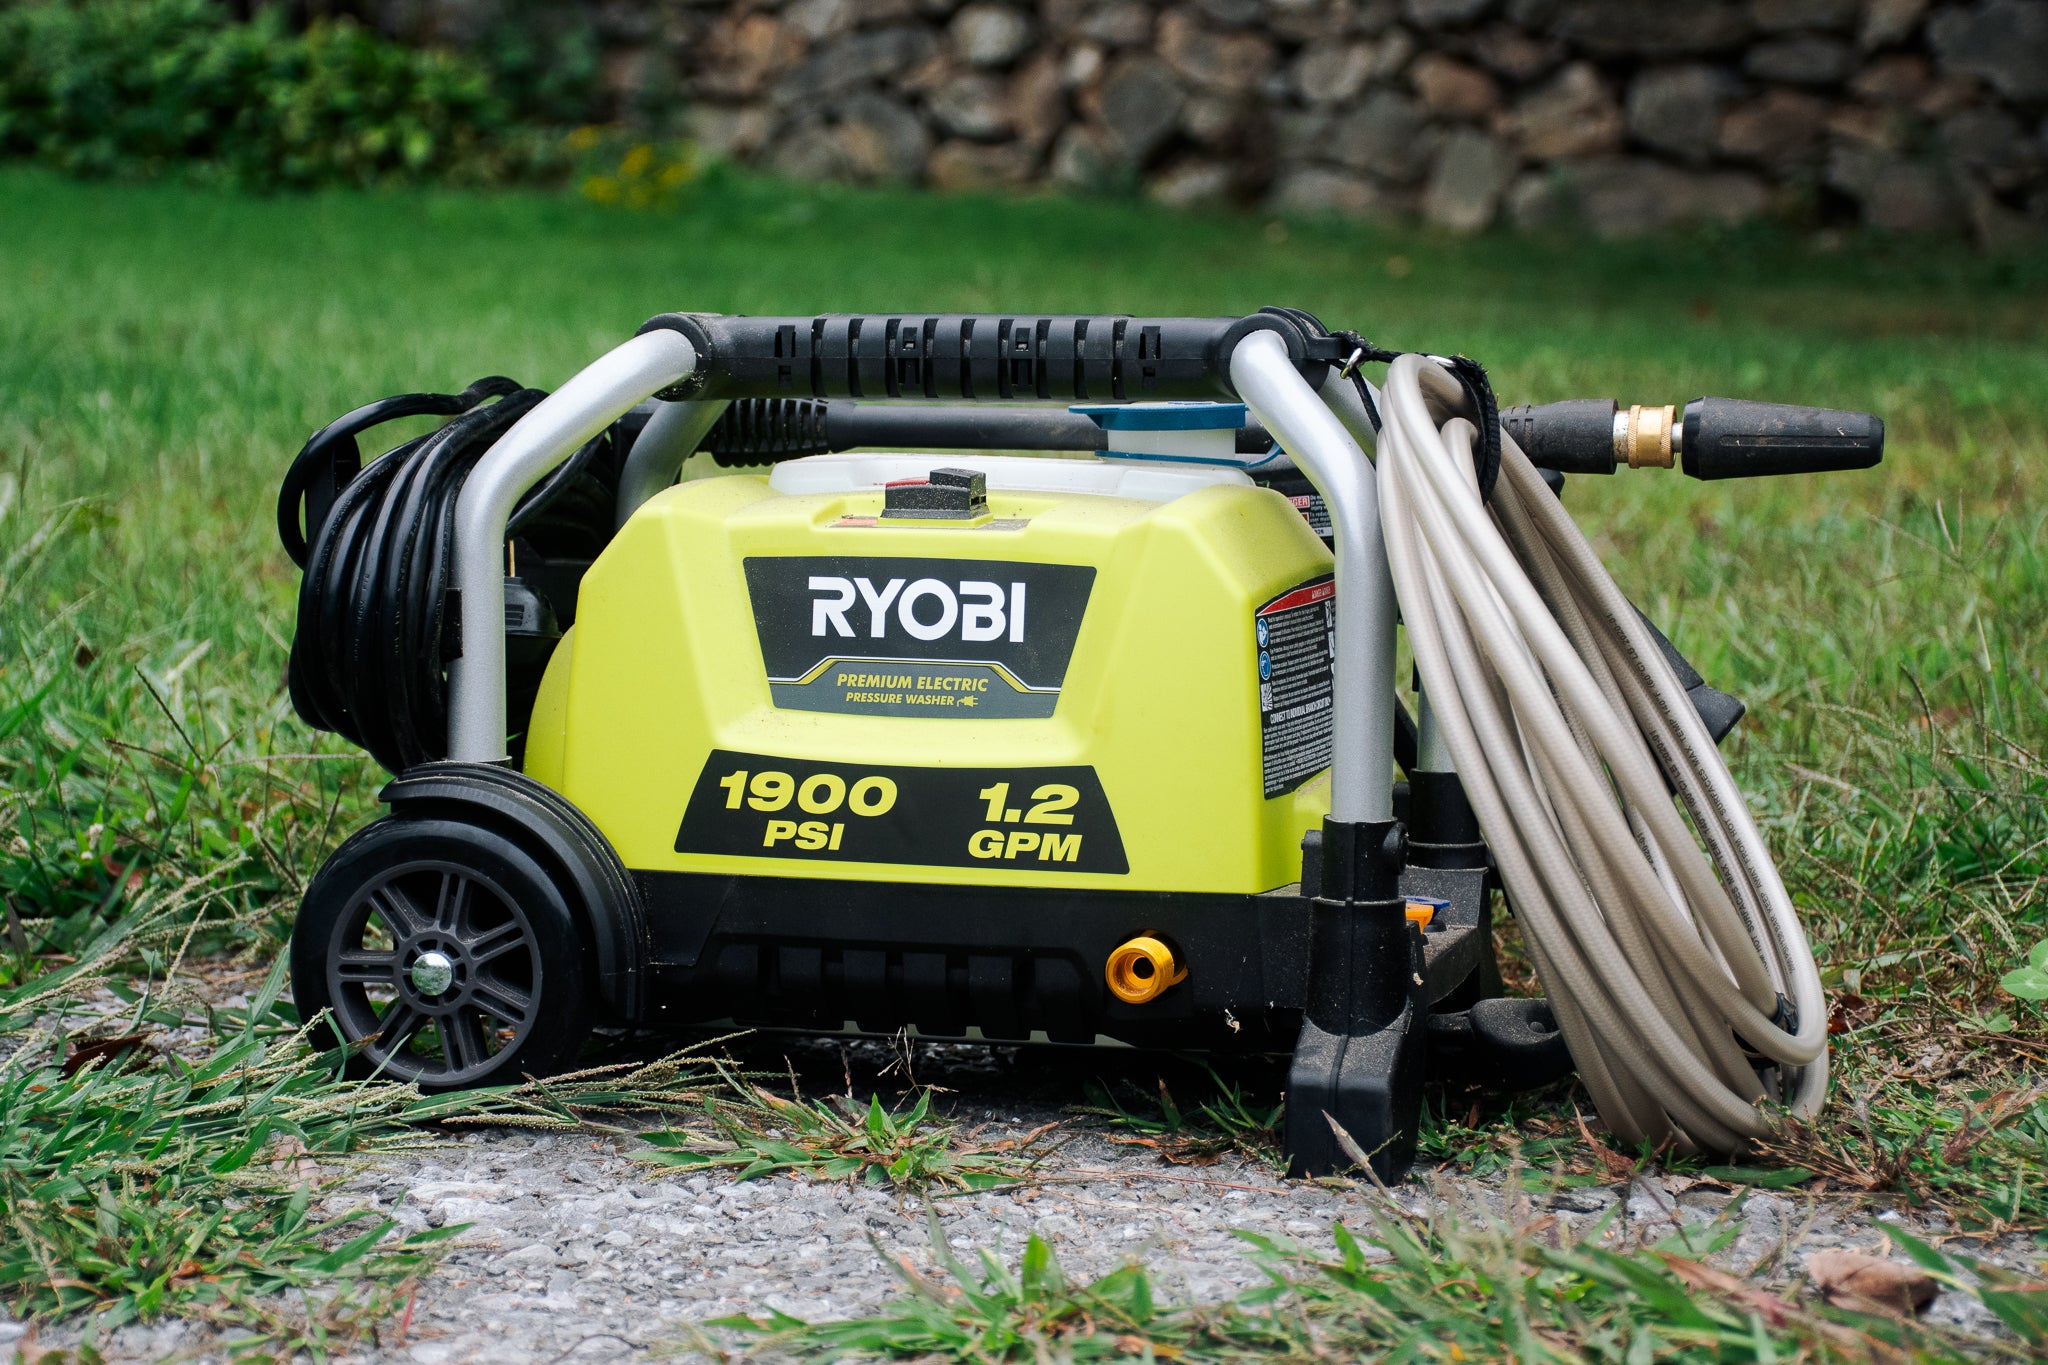 Pressure Washer Market 2021-26: Global Size, Share, Growth, Trends and Forecast